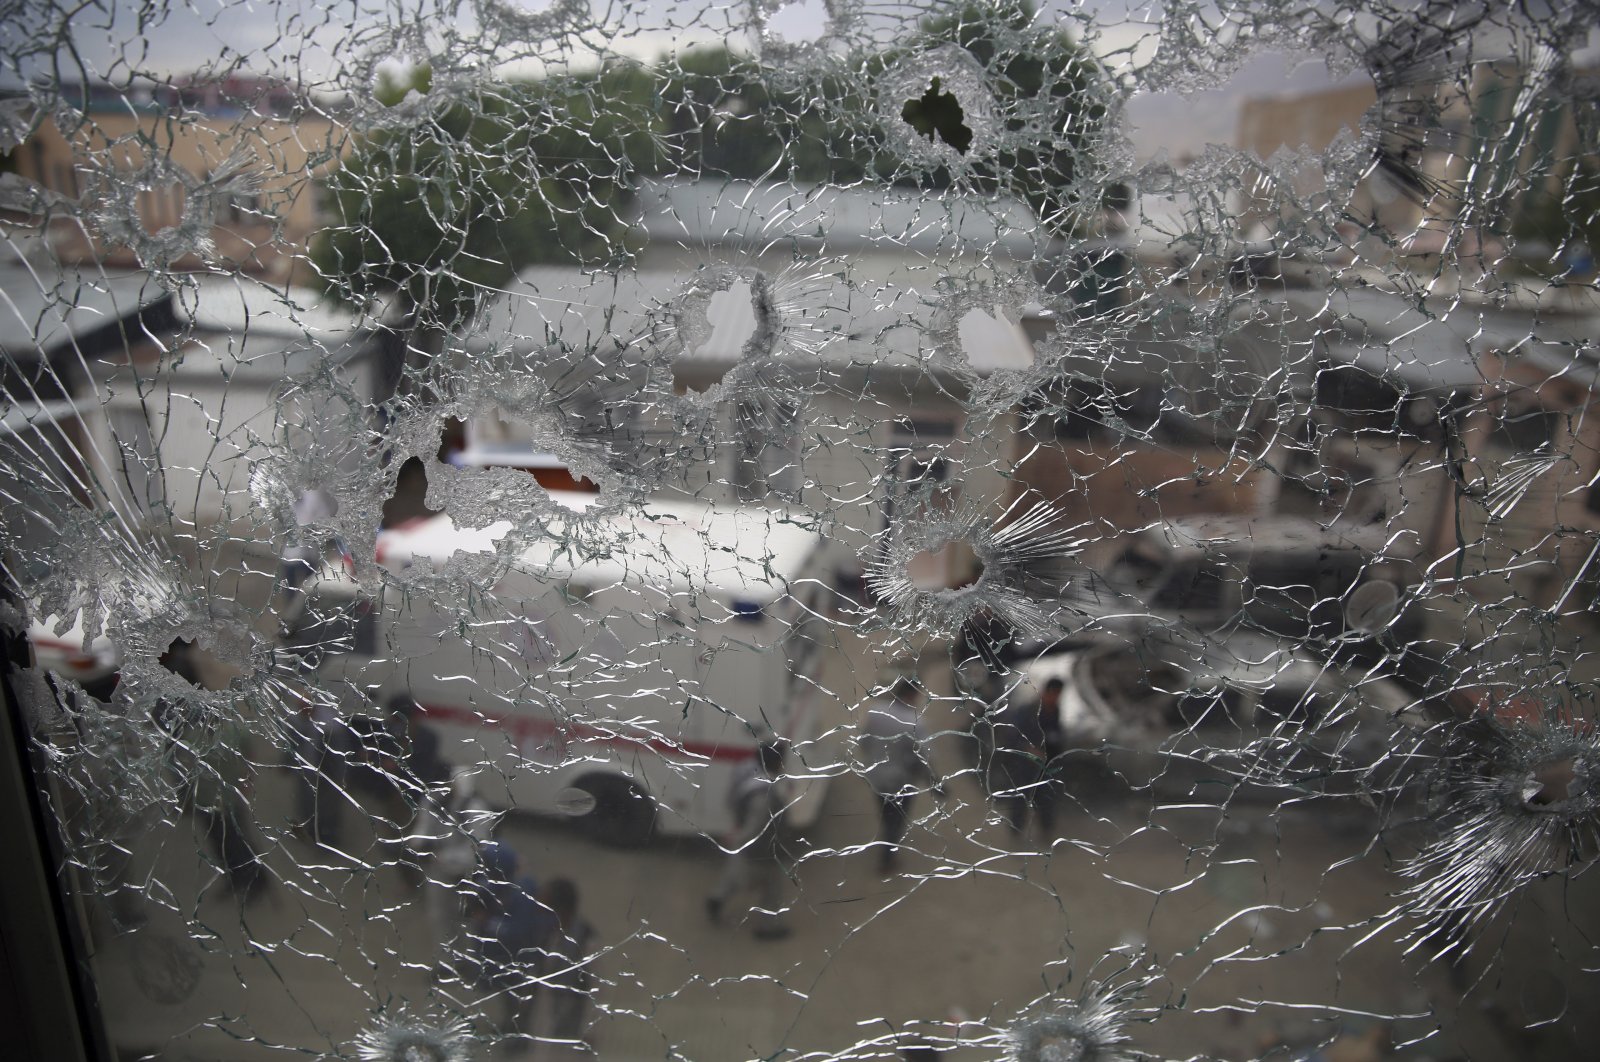 Afghan security officers are seen through the shattered window of a maternity hospital after an attack, in Kabul, Afghanistan, May 12, 2020. (AP Photo)